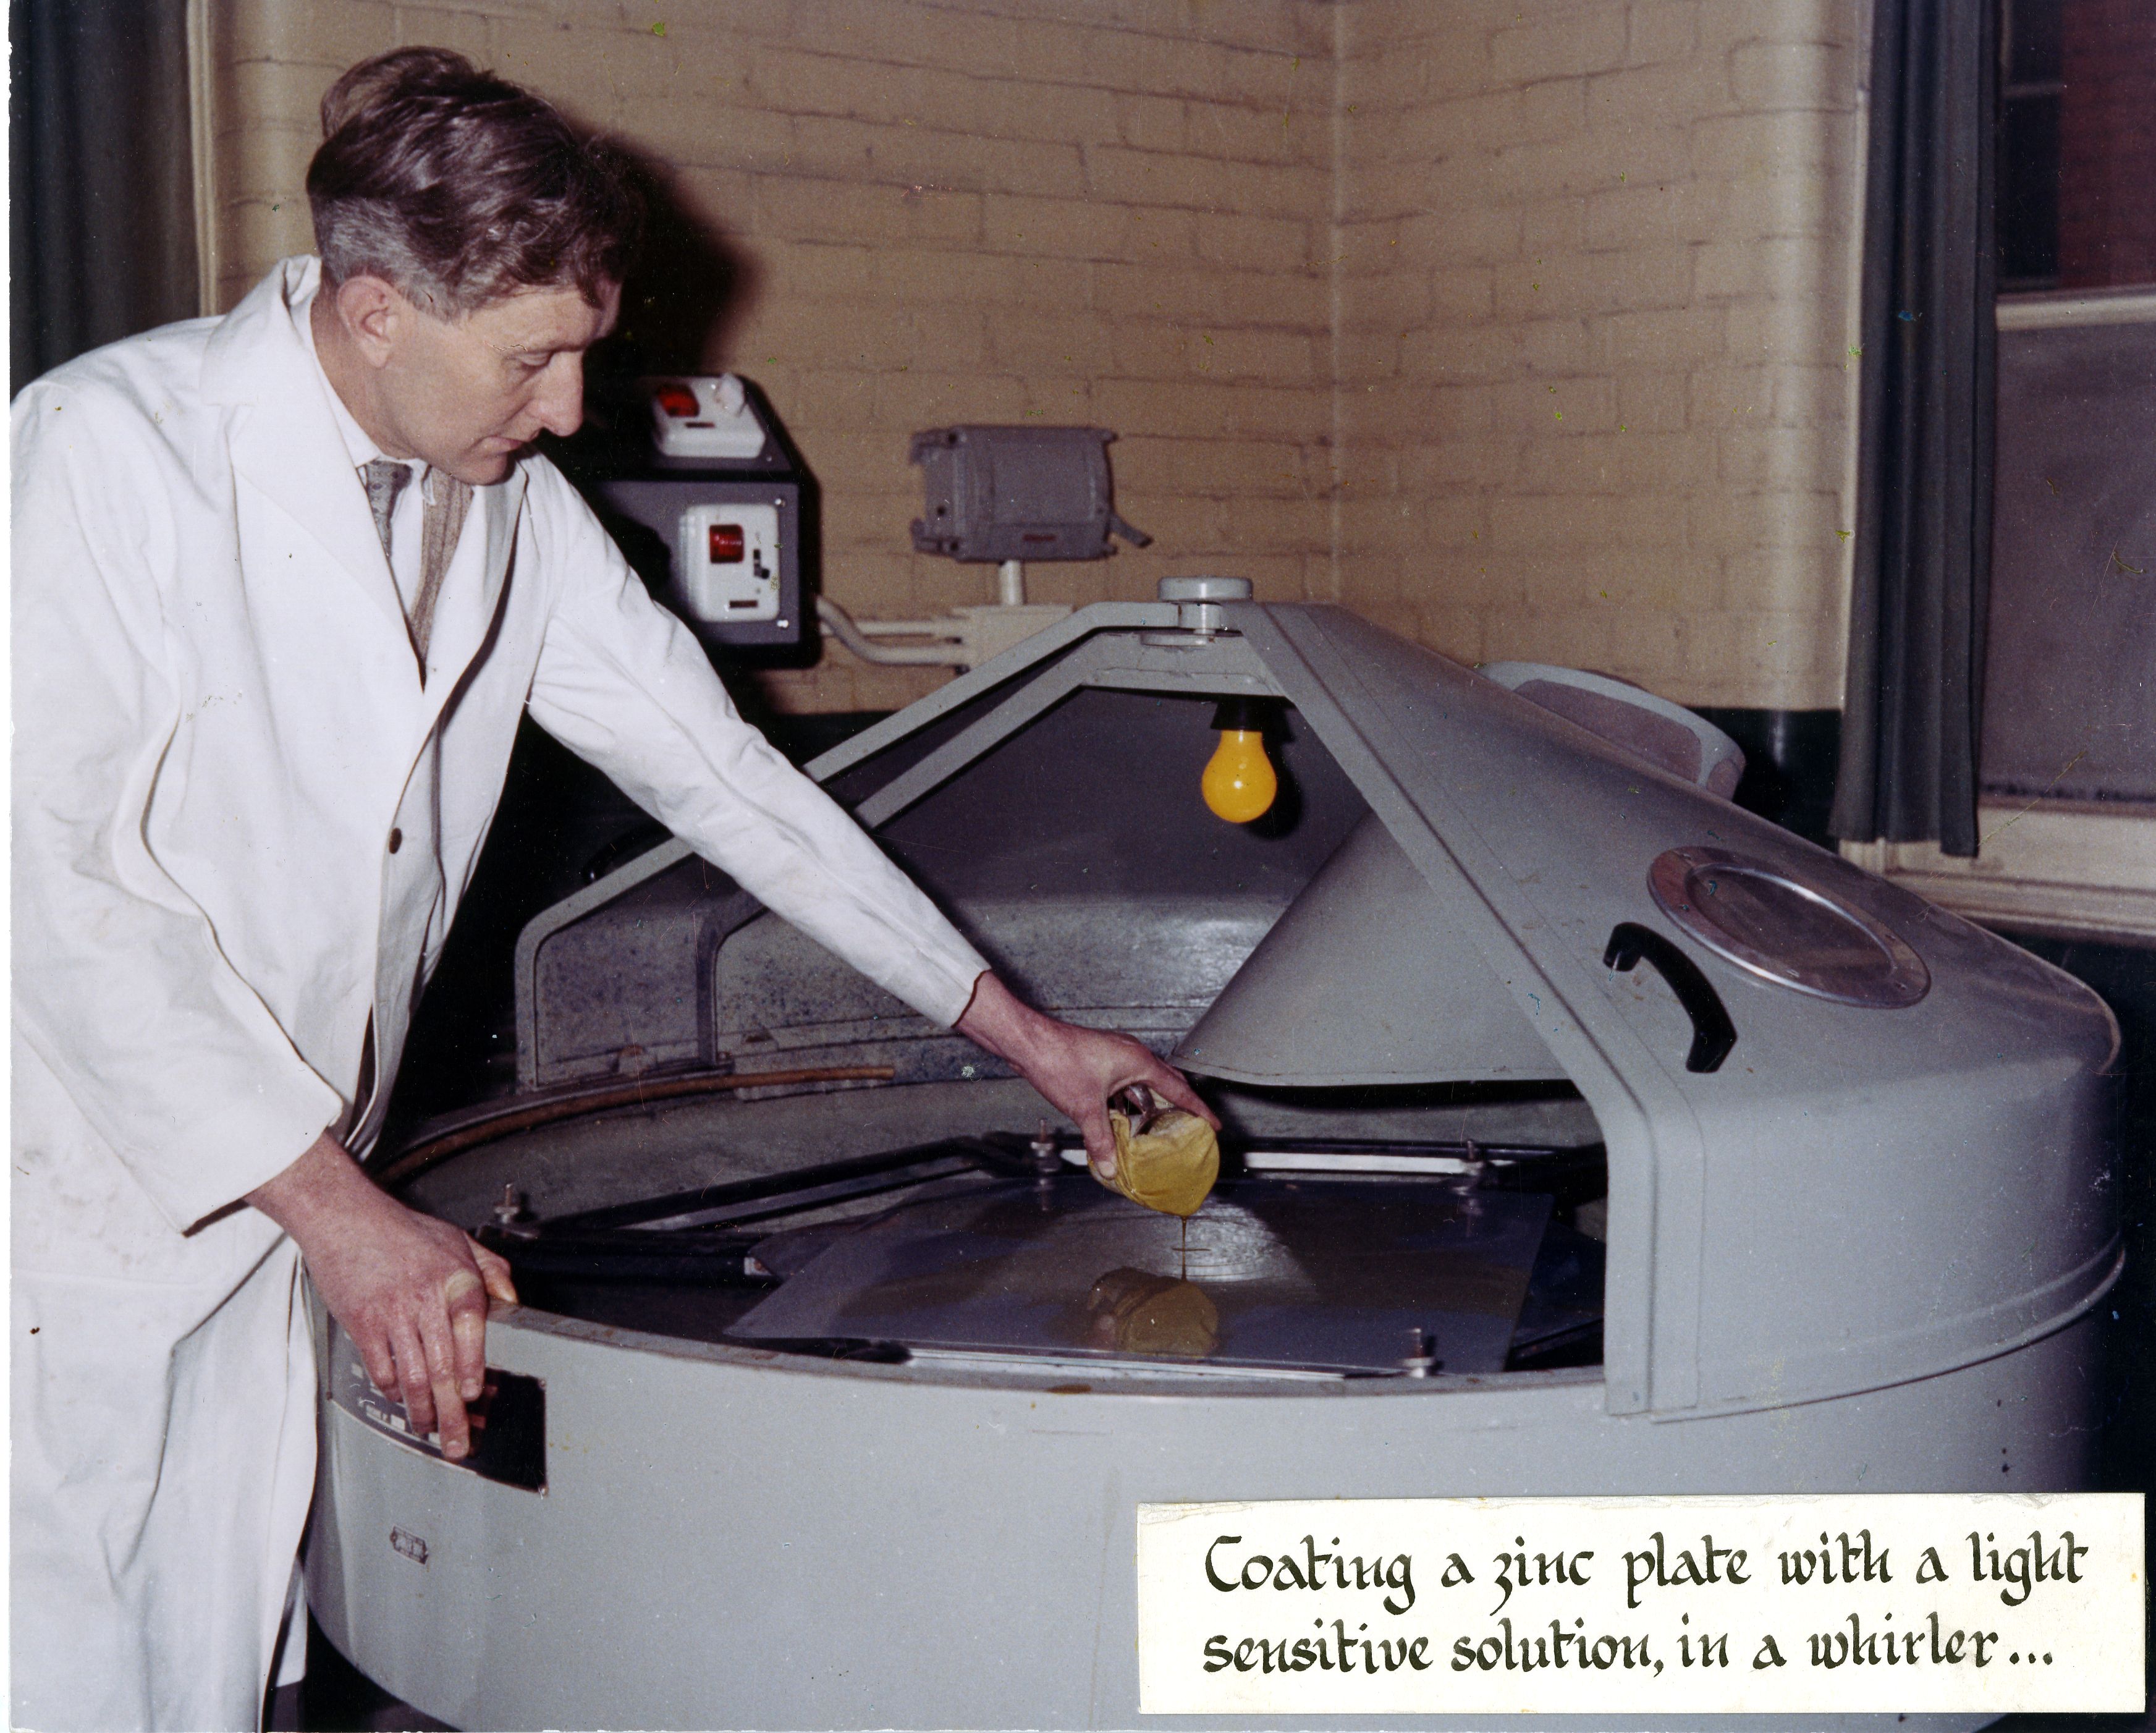 Coating a zinc plate with a light-sensitive solution in a whirler,